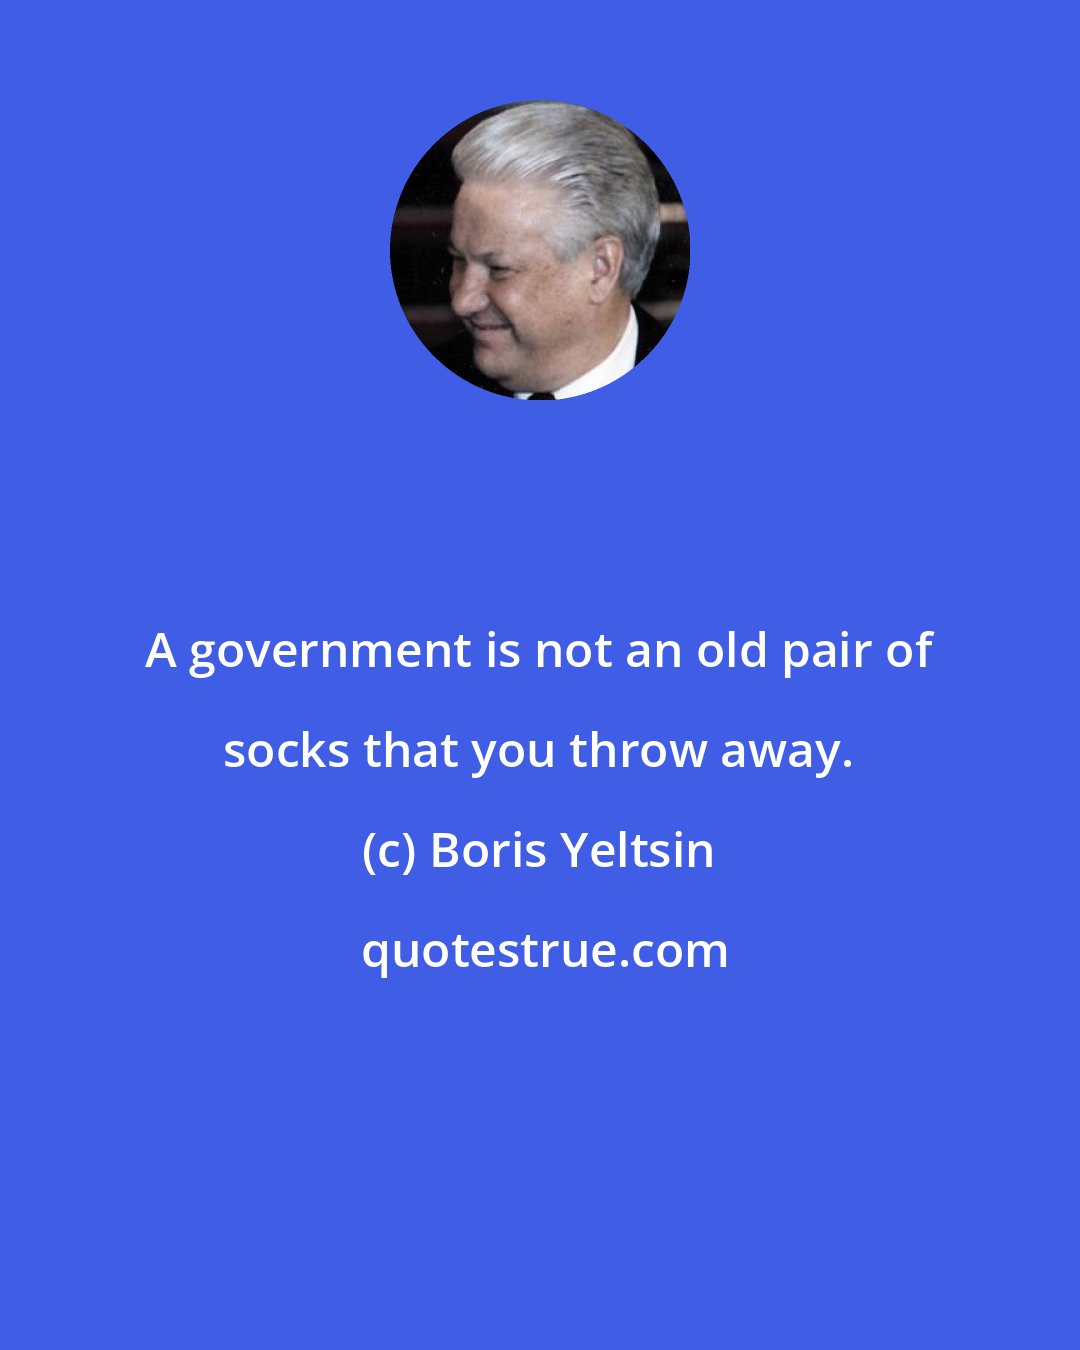 Boris Yeltsin: A government is not an old pair of socks that you throw away.